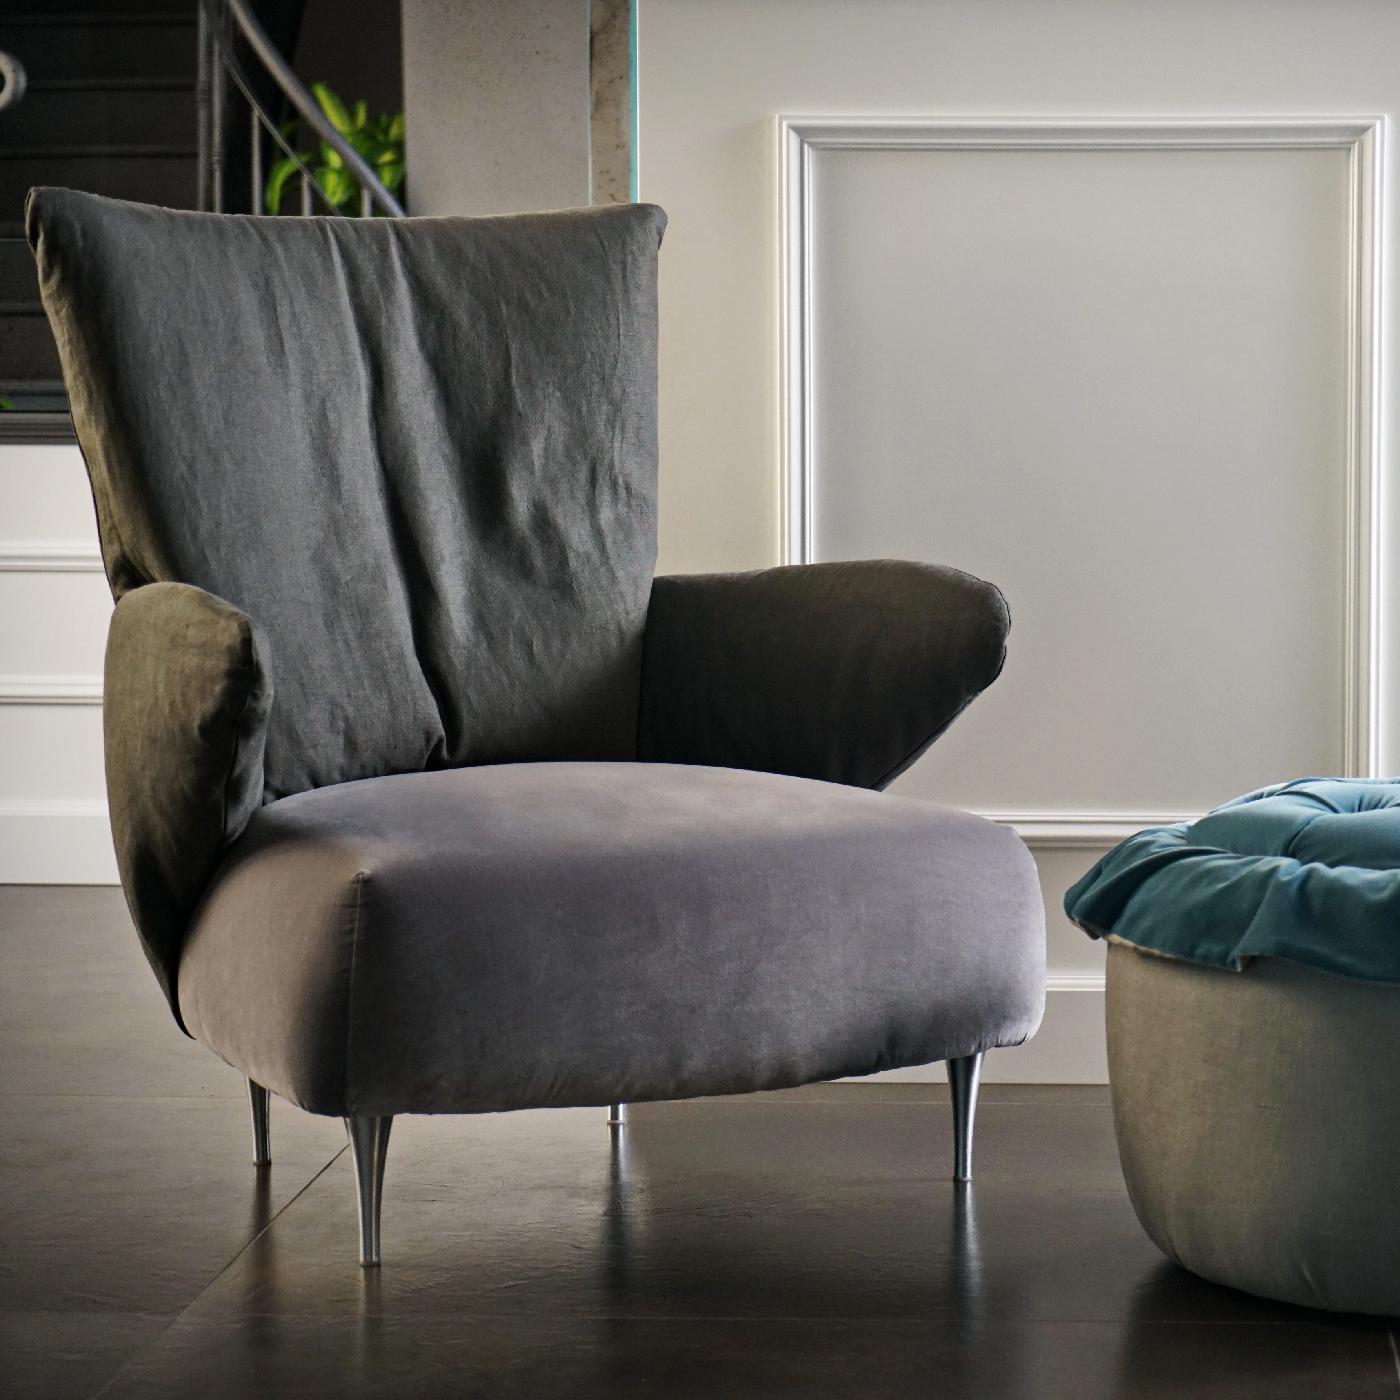 Soft and sweeping, Pank leans into style. It’s curved back and arms welcome you in, while the structure is a modern take on a classic liberty shape. As the nights draw in, Pank will be waiting for you – curl up in this cozy accent chair